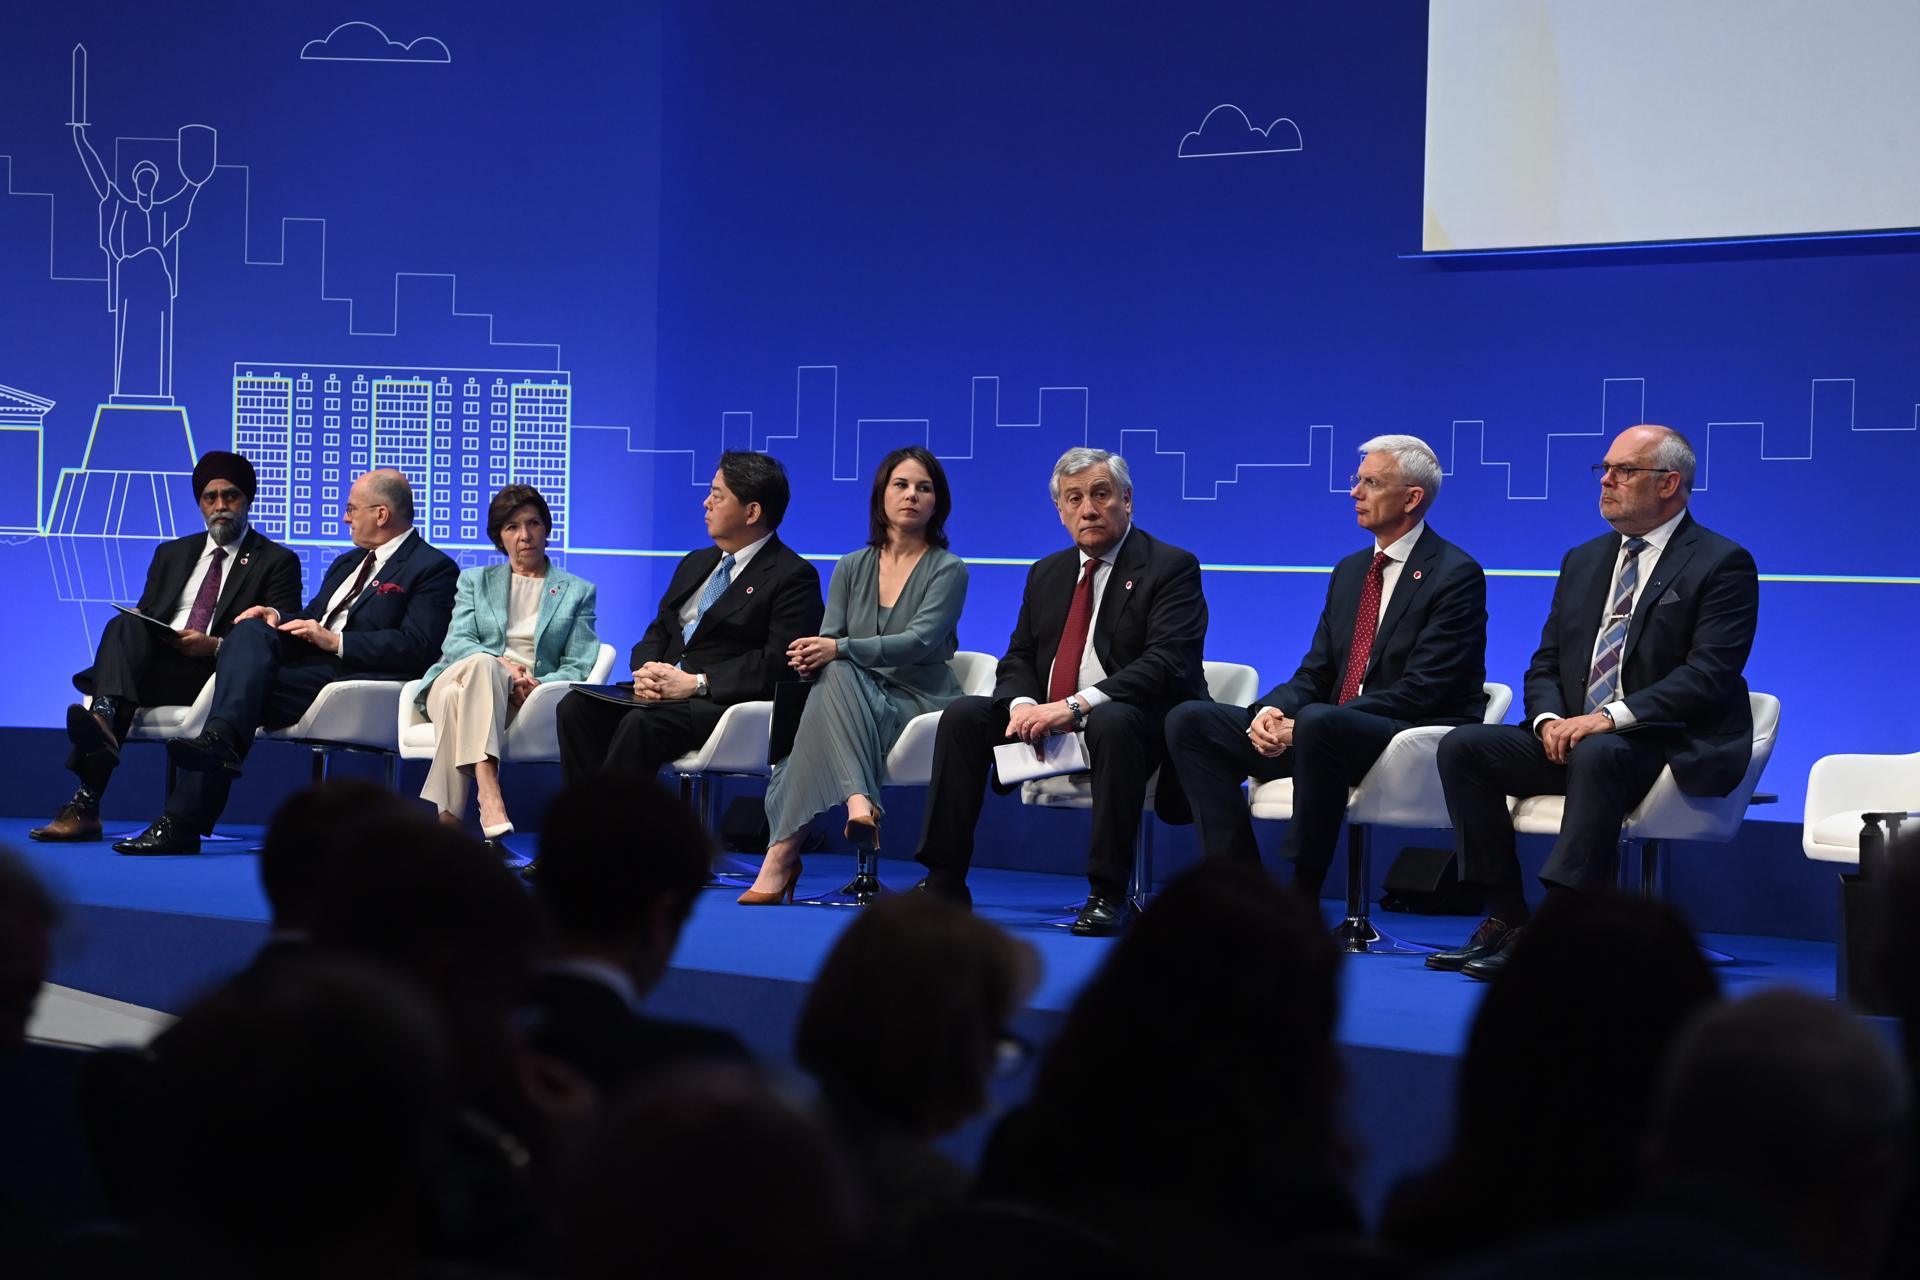 (L-R) Canadian International Development Minister Harjit Sajjan, Polish Foreign Minister Zbigniew Rau, French Foreign Minister Catherine Colonna, Japanese Foreign Minister Yoshimasa Hayashi, German Federal Minister for Foreign Affairs Annalena Baerbock, Italian Foreign Minister Antonio Tajani, Prime Minister of Latvia Arturs Karins and President of Estonia Alar Karis at the first day of the Ukraine Recovery Conference (URC) in London, Britain 21 June 2023. EFE/EPA/ANDY RAIN / POOL
